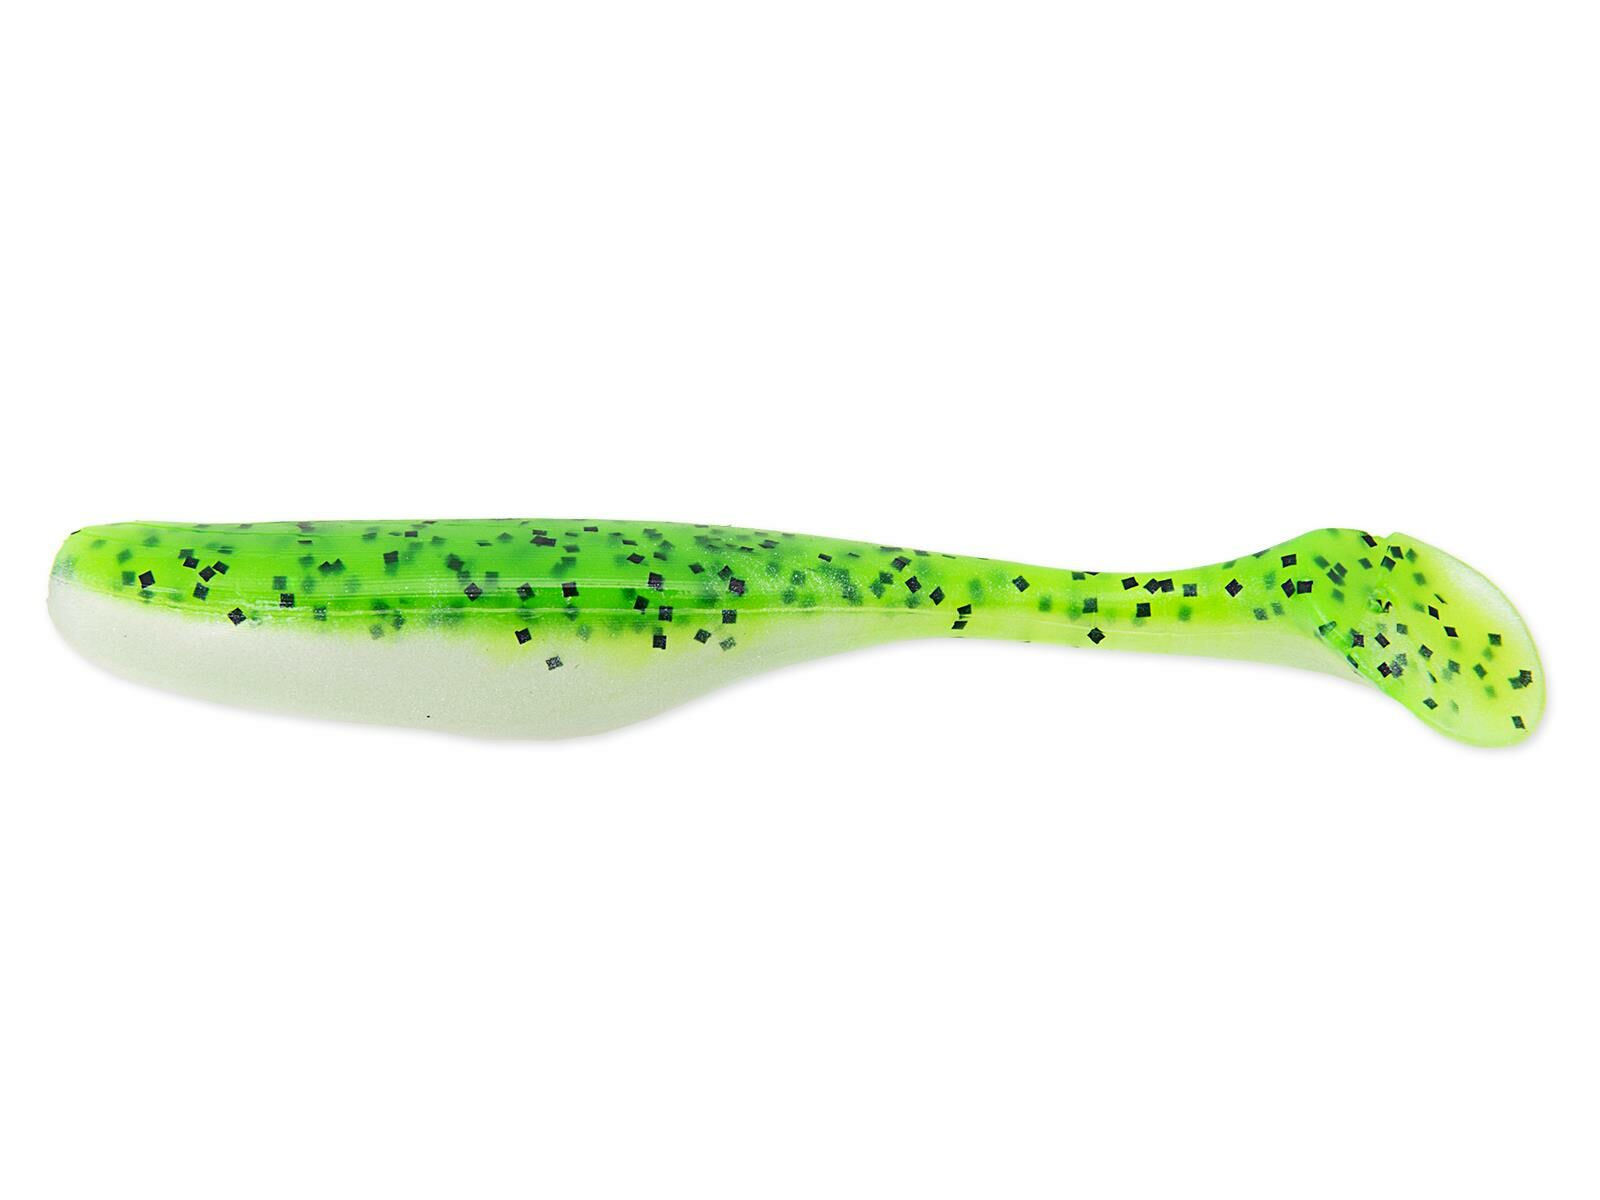 4" Walleye Assassin - Chartreuse Pepper Shad